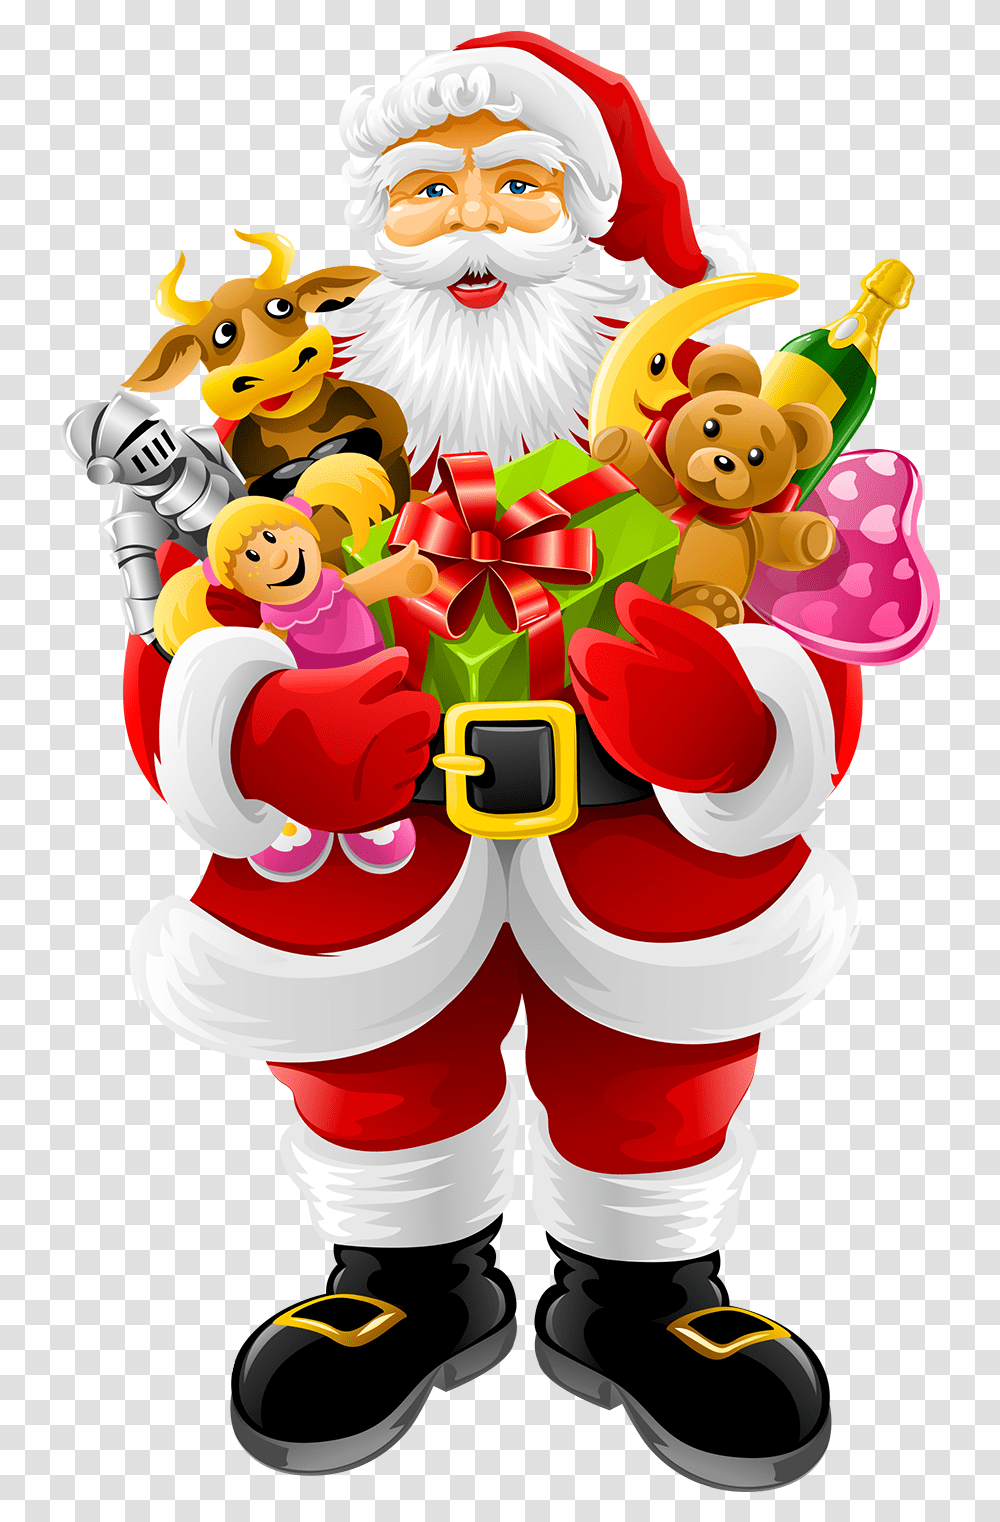 Santa Claus Holding Gifts Image Christmas Festival Images Download, Elf, Toy Transparent Png